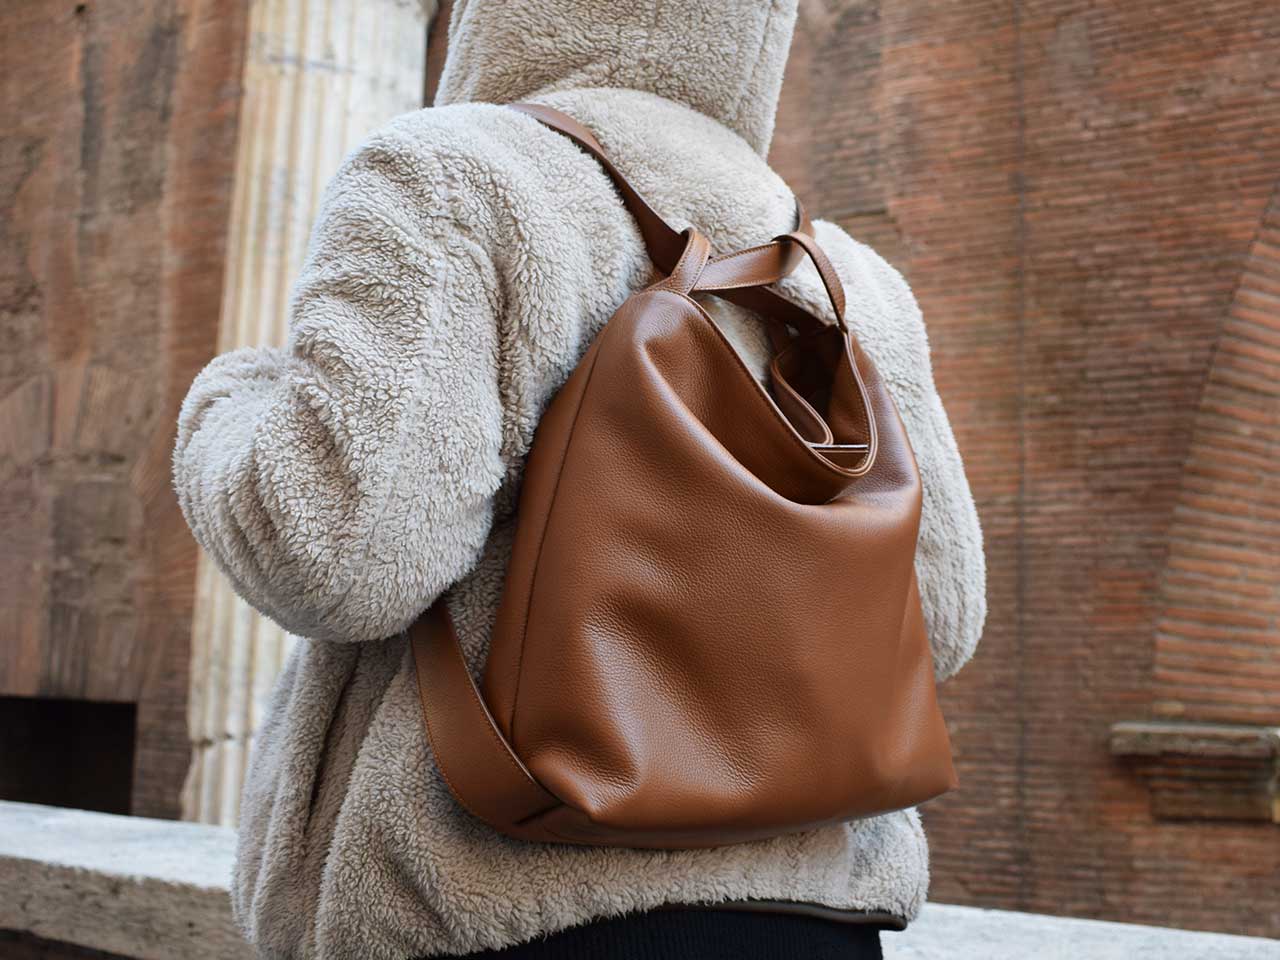 Carmenta, Italian leather tote bag backpack designed and handcrafted in Rome by Riccardo Mancini